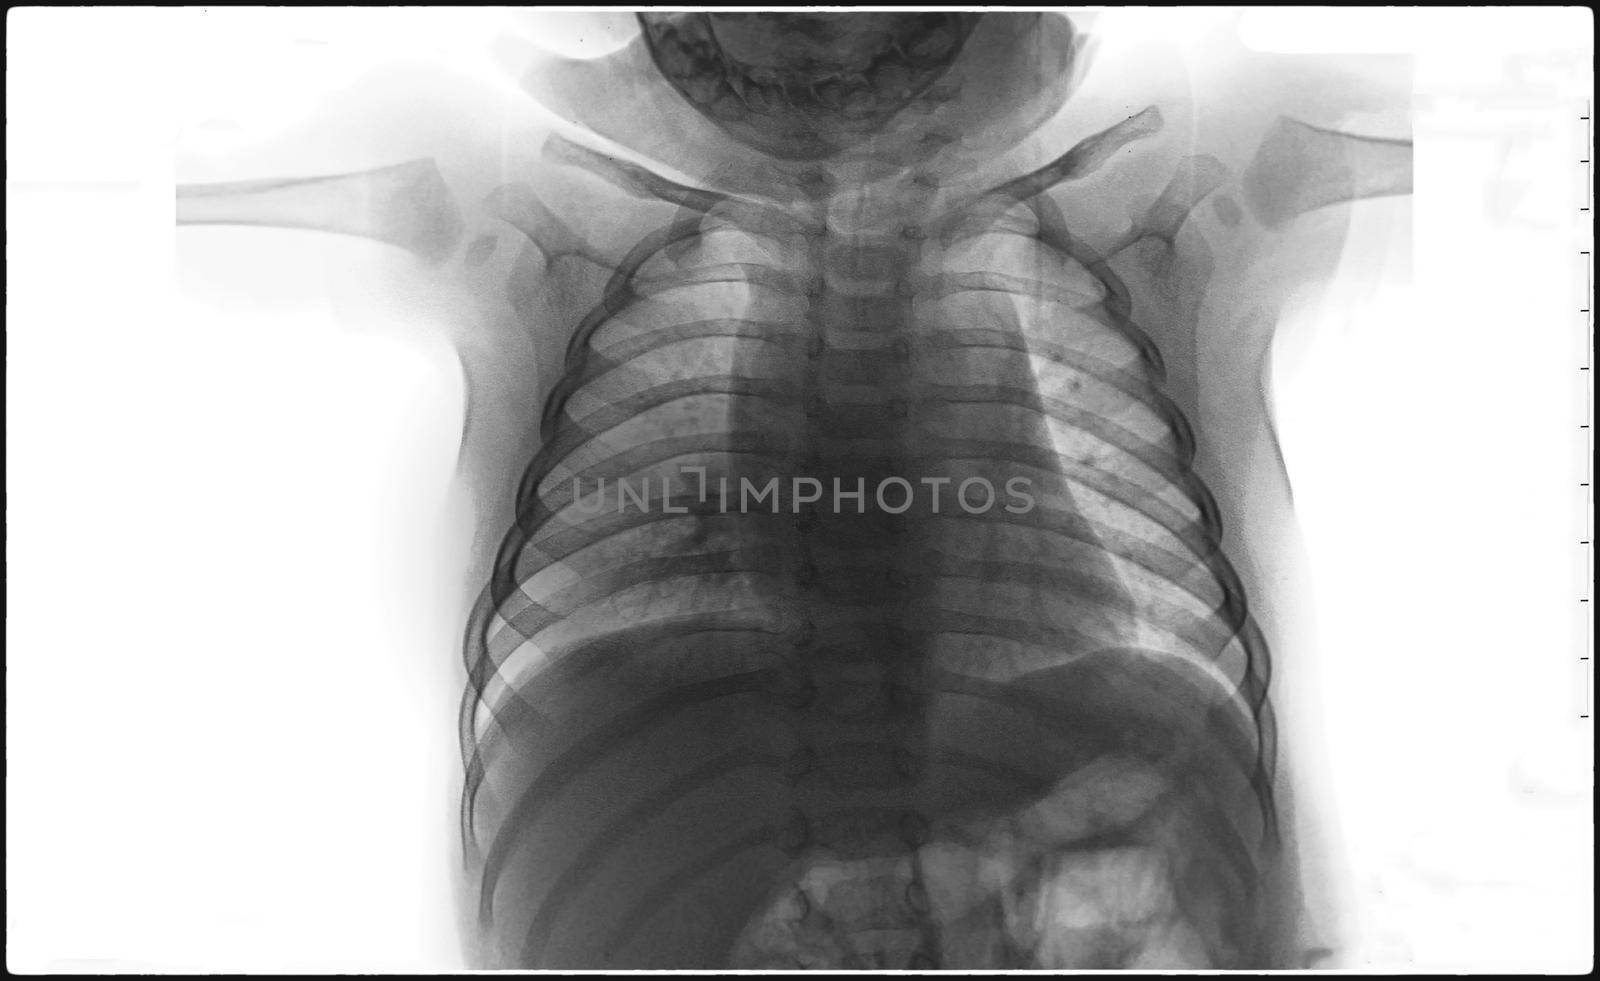 X-Ray Image Of Human Chest for a medical diagnosis, coronavirus or Covid-19 concept by chuanchai